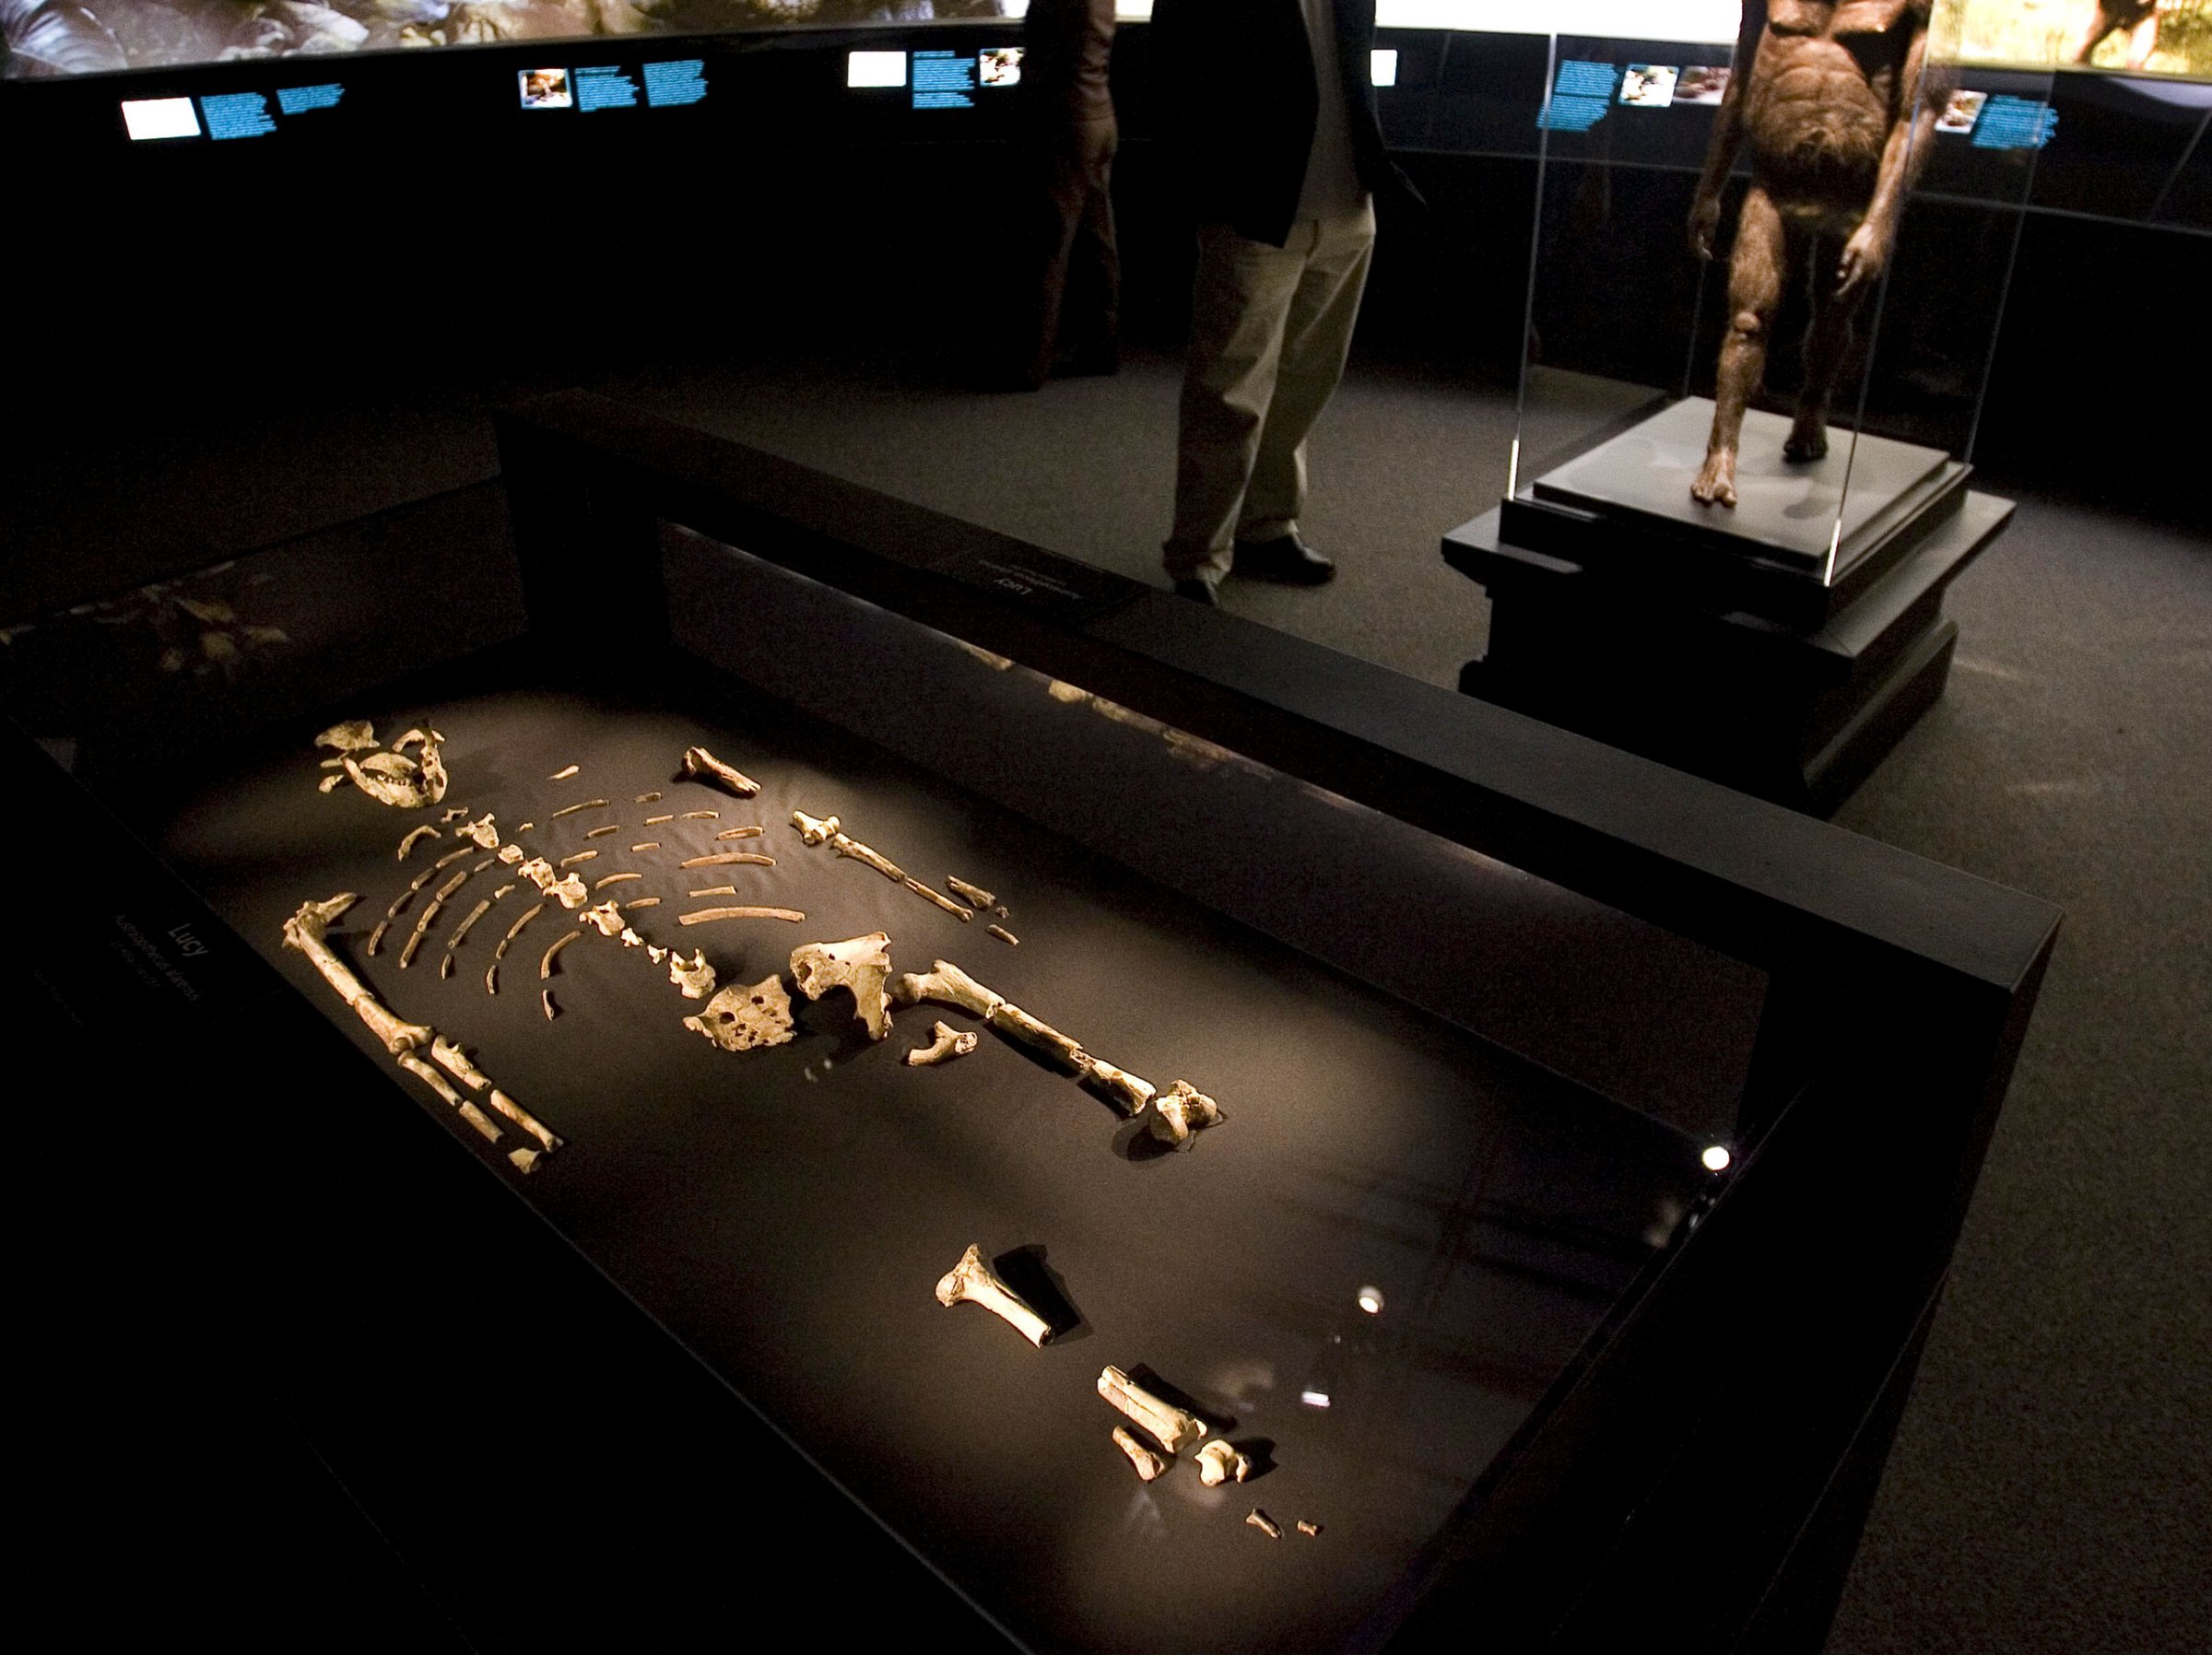 The 3.2 million year old fossilized remains of "Lucy", the most complete example of the hominid Australopithecus afarensis, is displayed at the Houston Museum of Natural Science in Houston on Aug. 28, 2007.